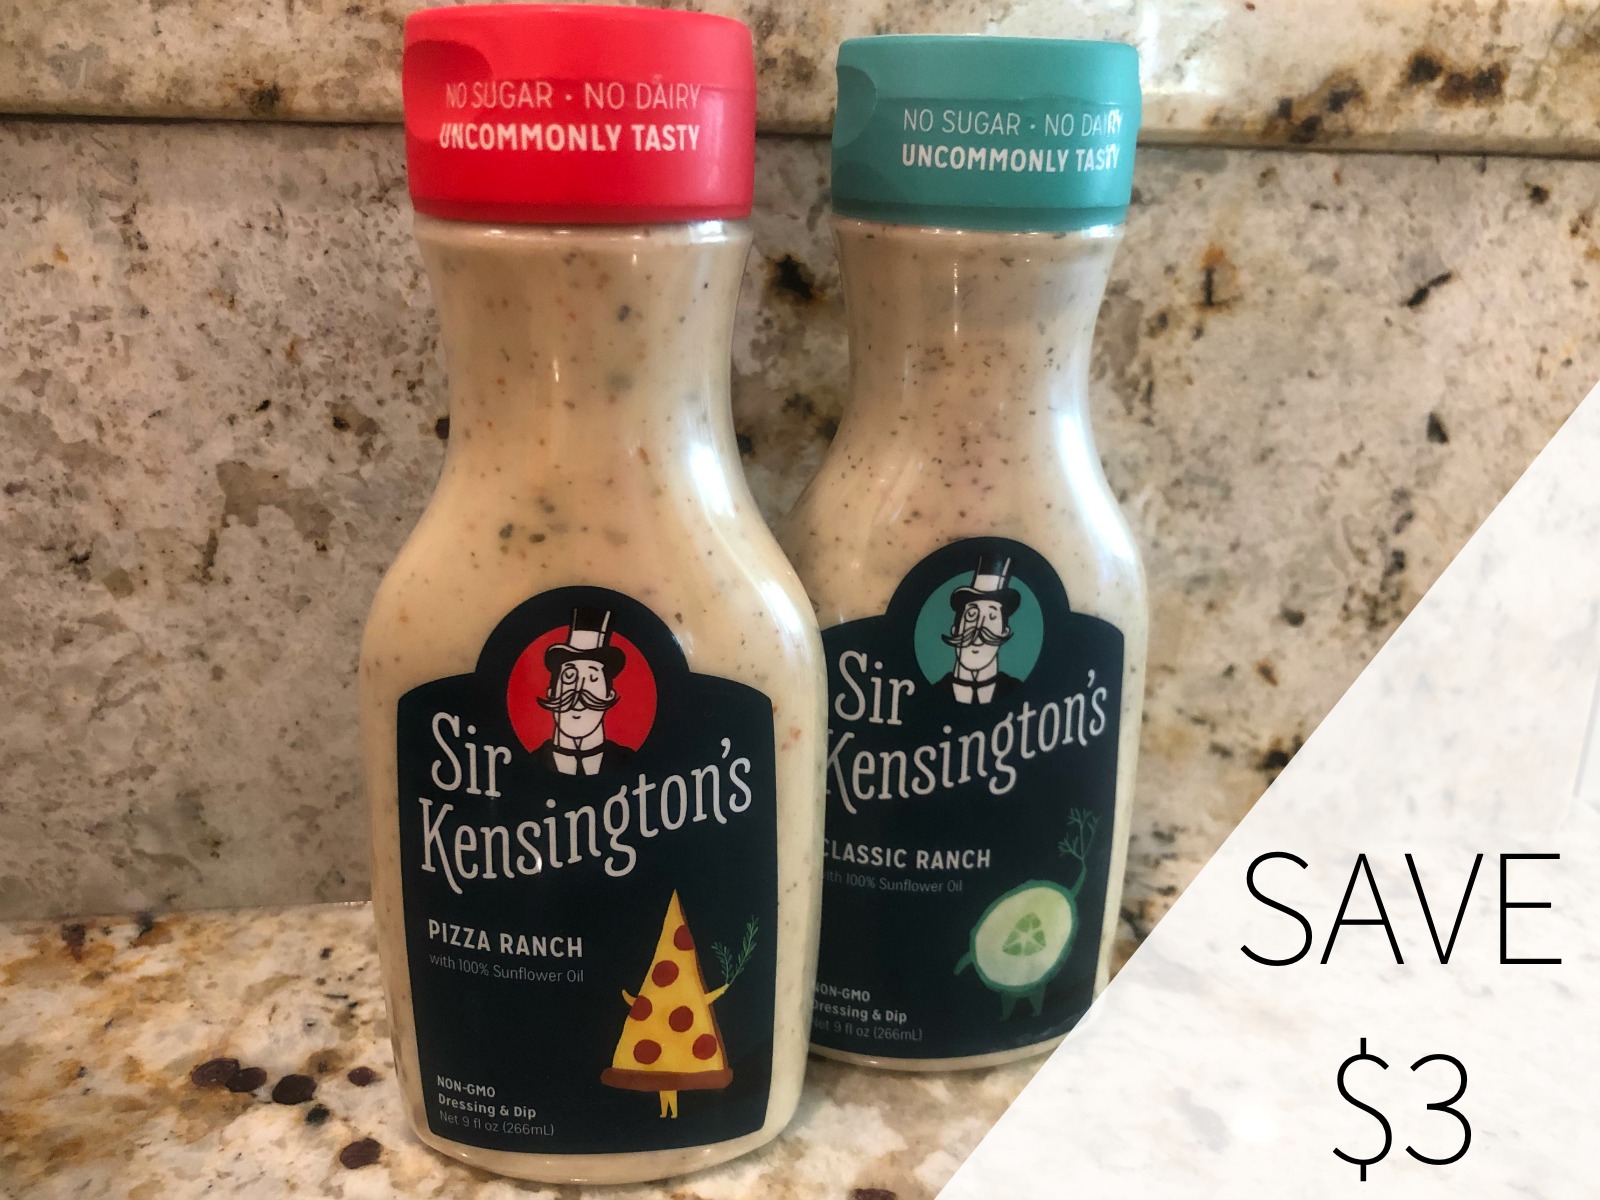 Save Up To $3 On A Bottle Of Sir Kensington’s Ranch – Just $1.49 At Publix!